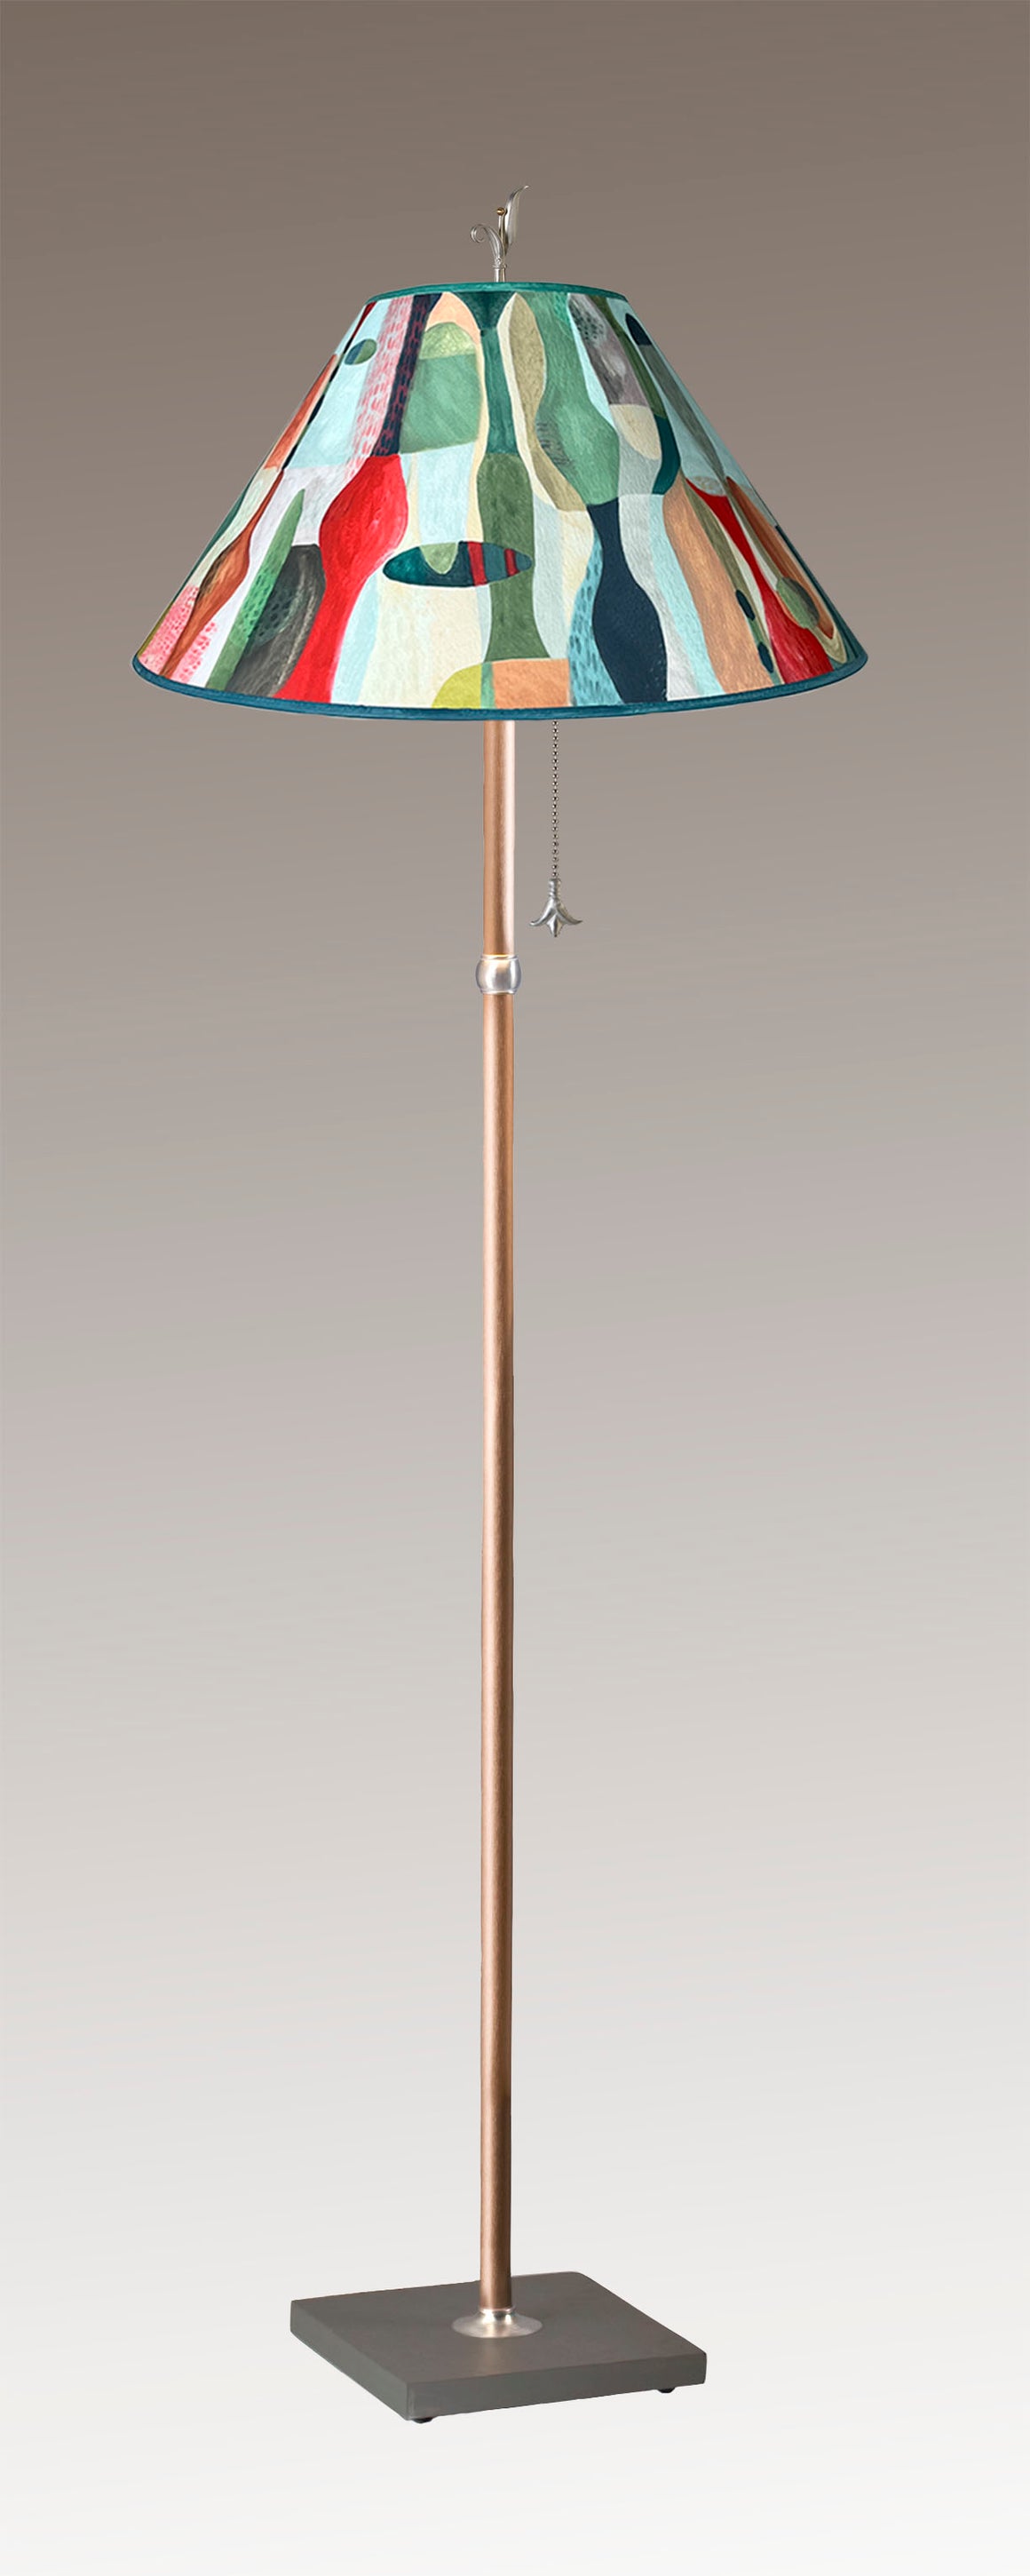 Copper Floor Lamp with Large Conical Shade in Riviera in Poppy